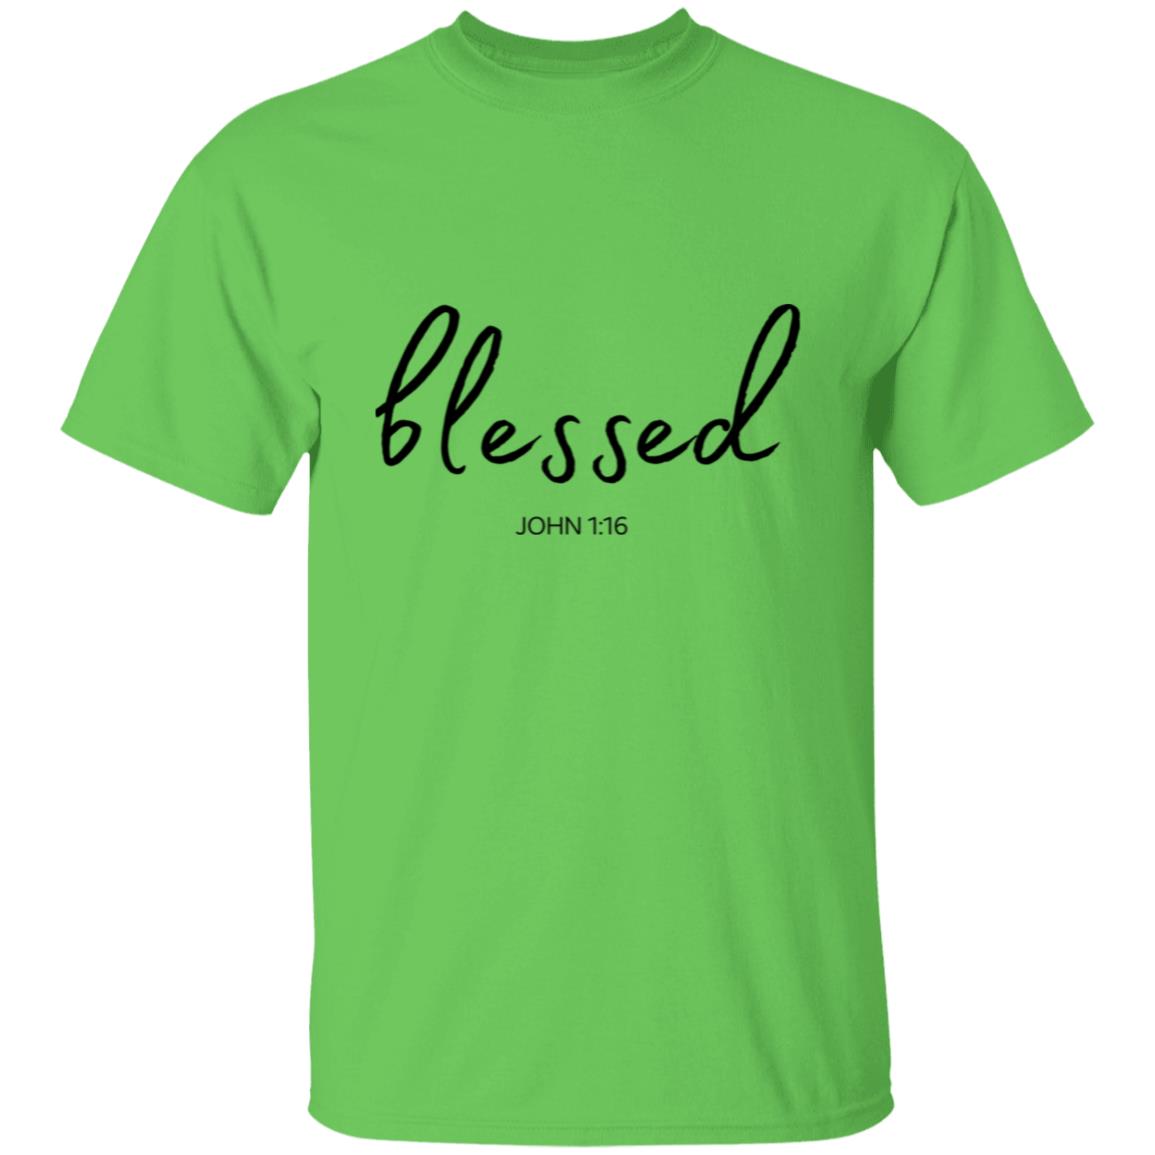 Get trendy with Blessed (John 1:16) T-Shirt: Words of Faith Series (Black Text) - T-Shirts available at Good Gift Company. Grab yours for $21.95 today!